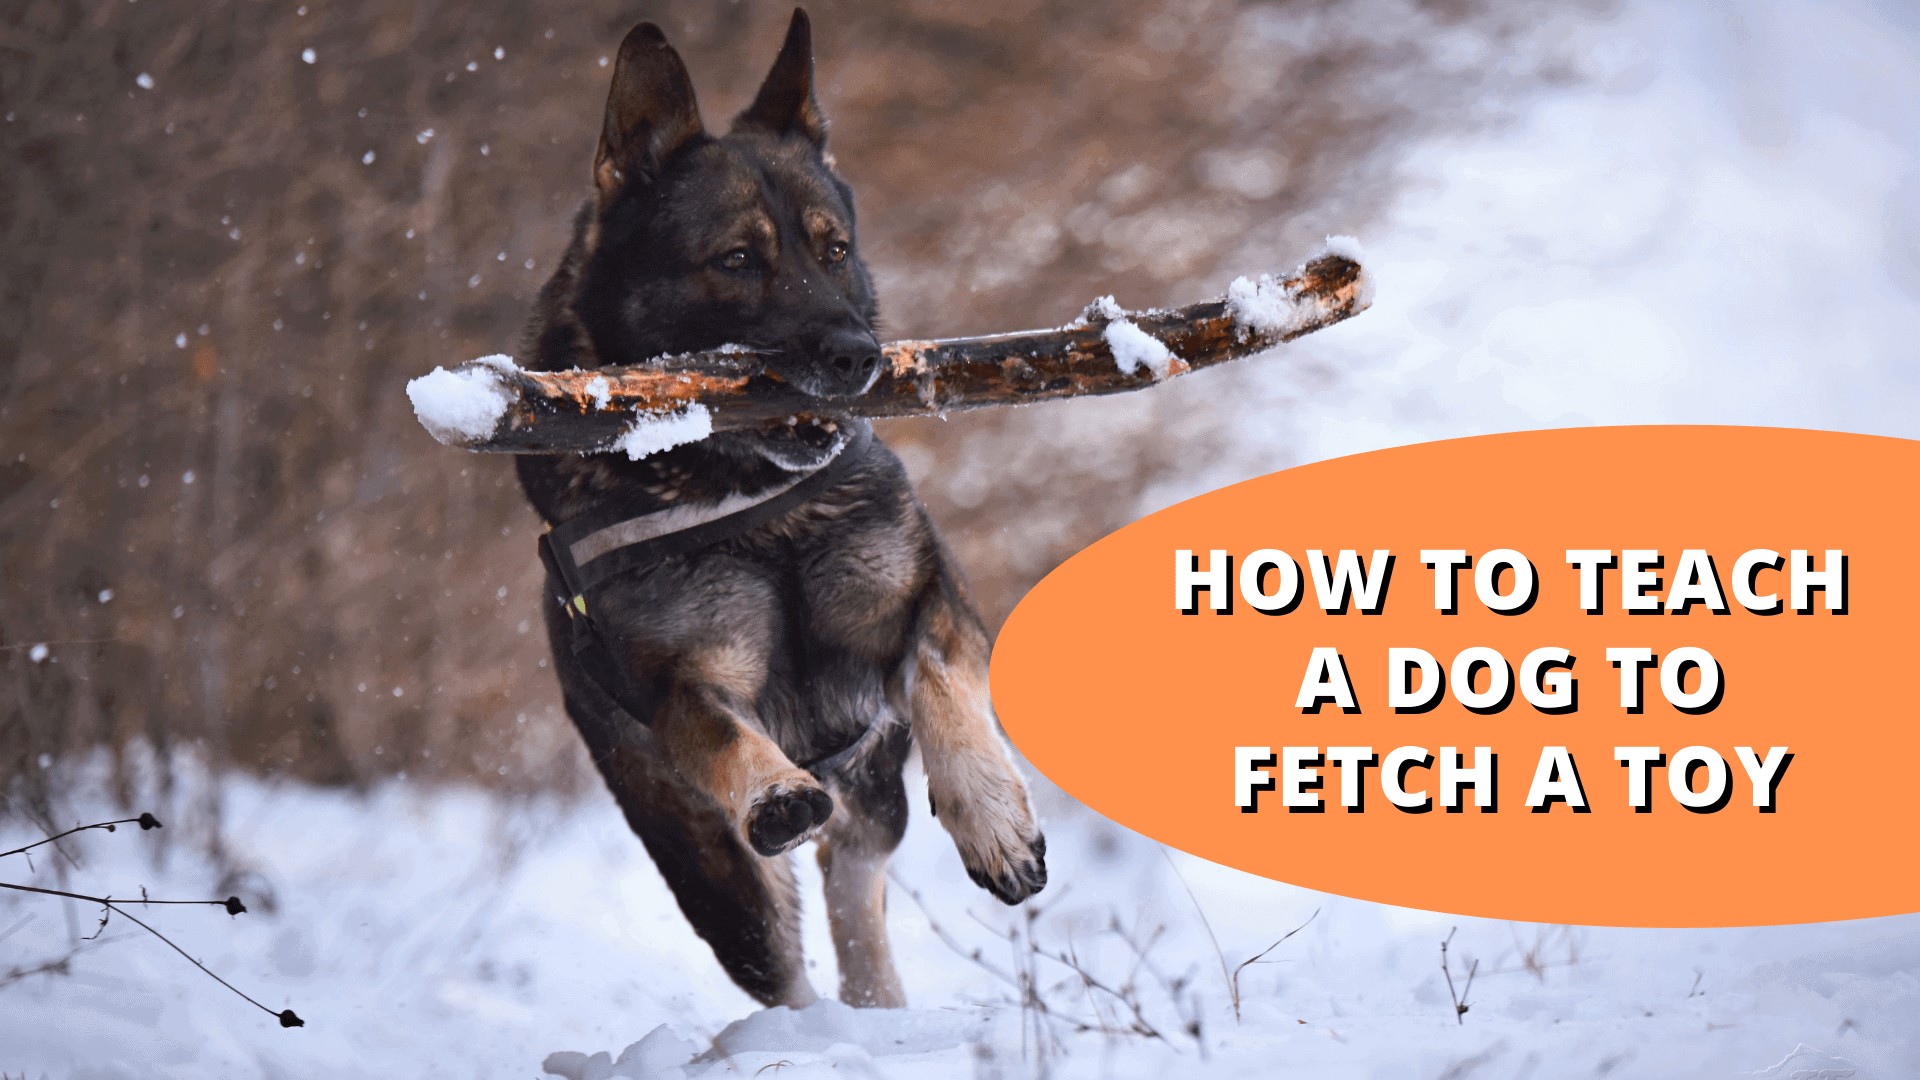 How to Teach a Dog to Fetch a Toy | 6 Simple Steps